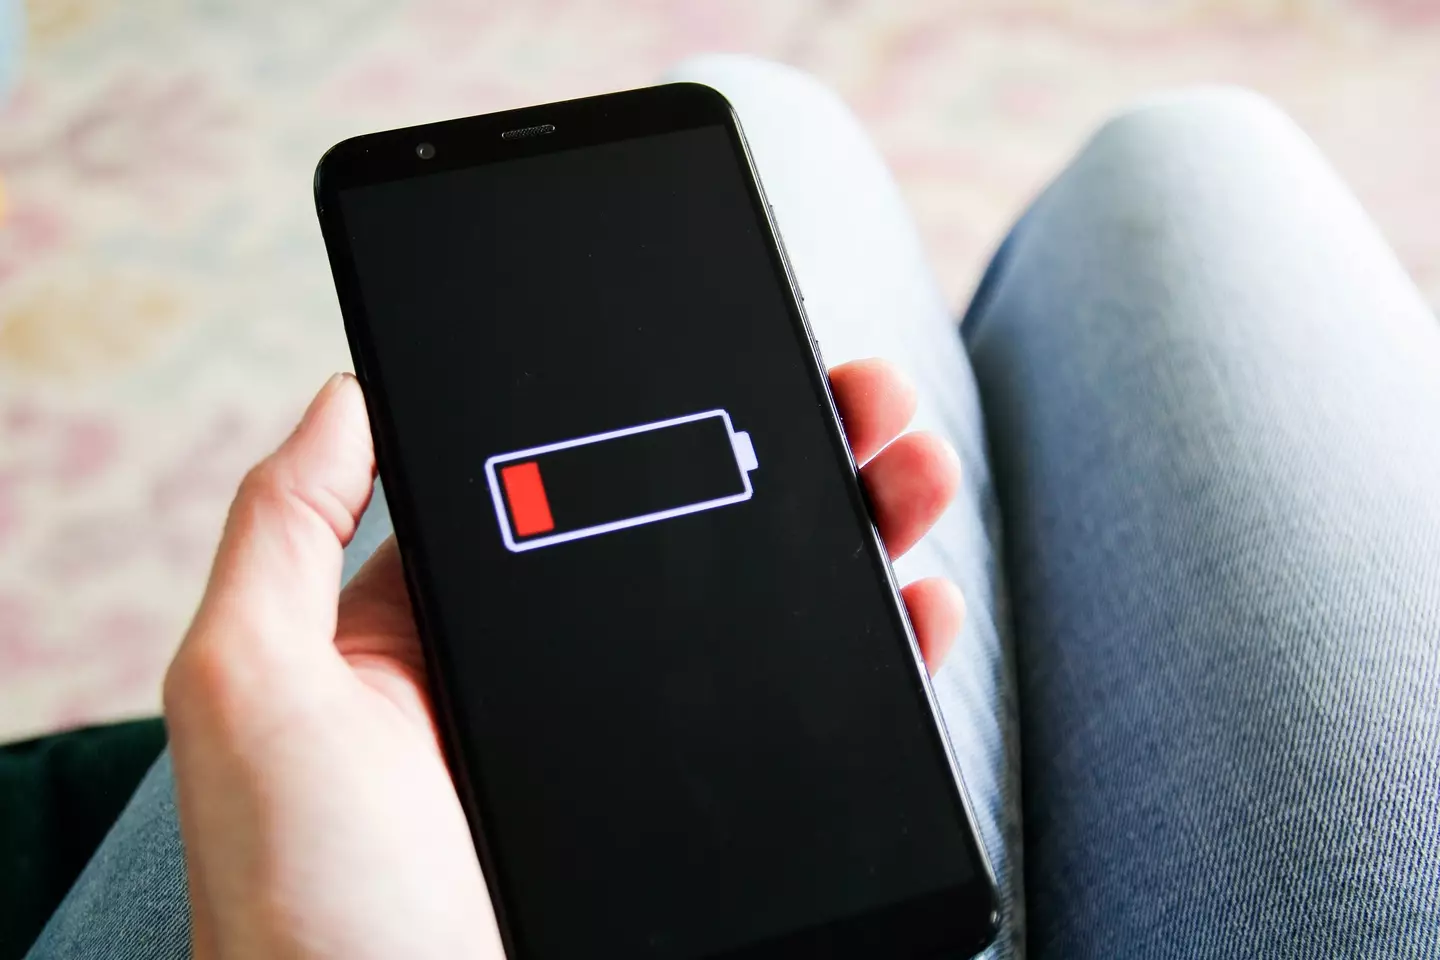 Think Twice Before You Close: Why Shutting Apps on Your iPhone Could Zap Your Battery Life